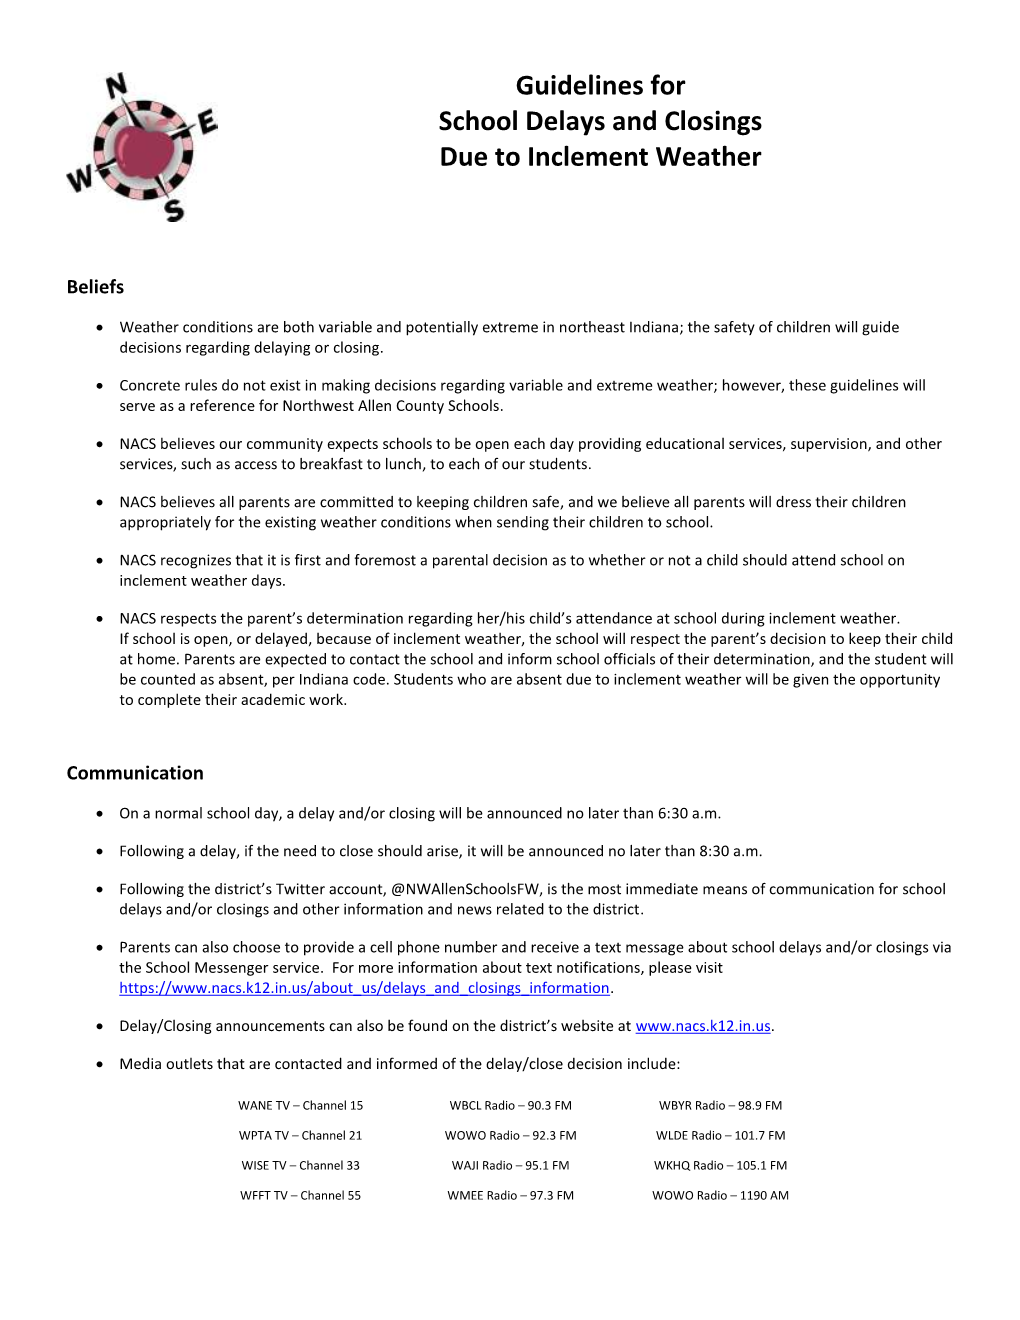 Guidelines for School Delays and Closings Due to Inclement Weather